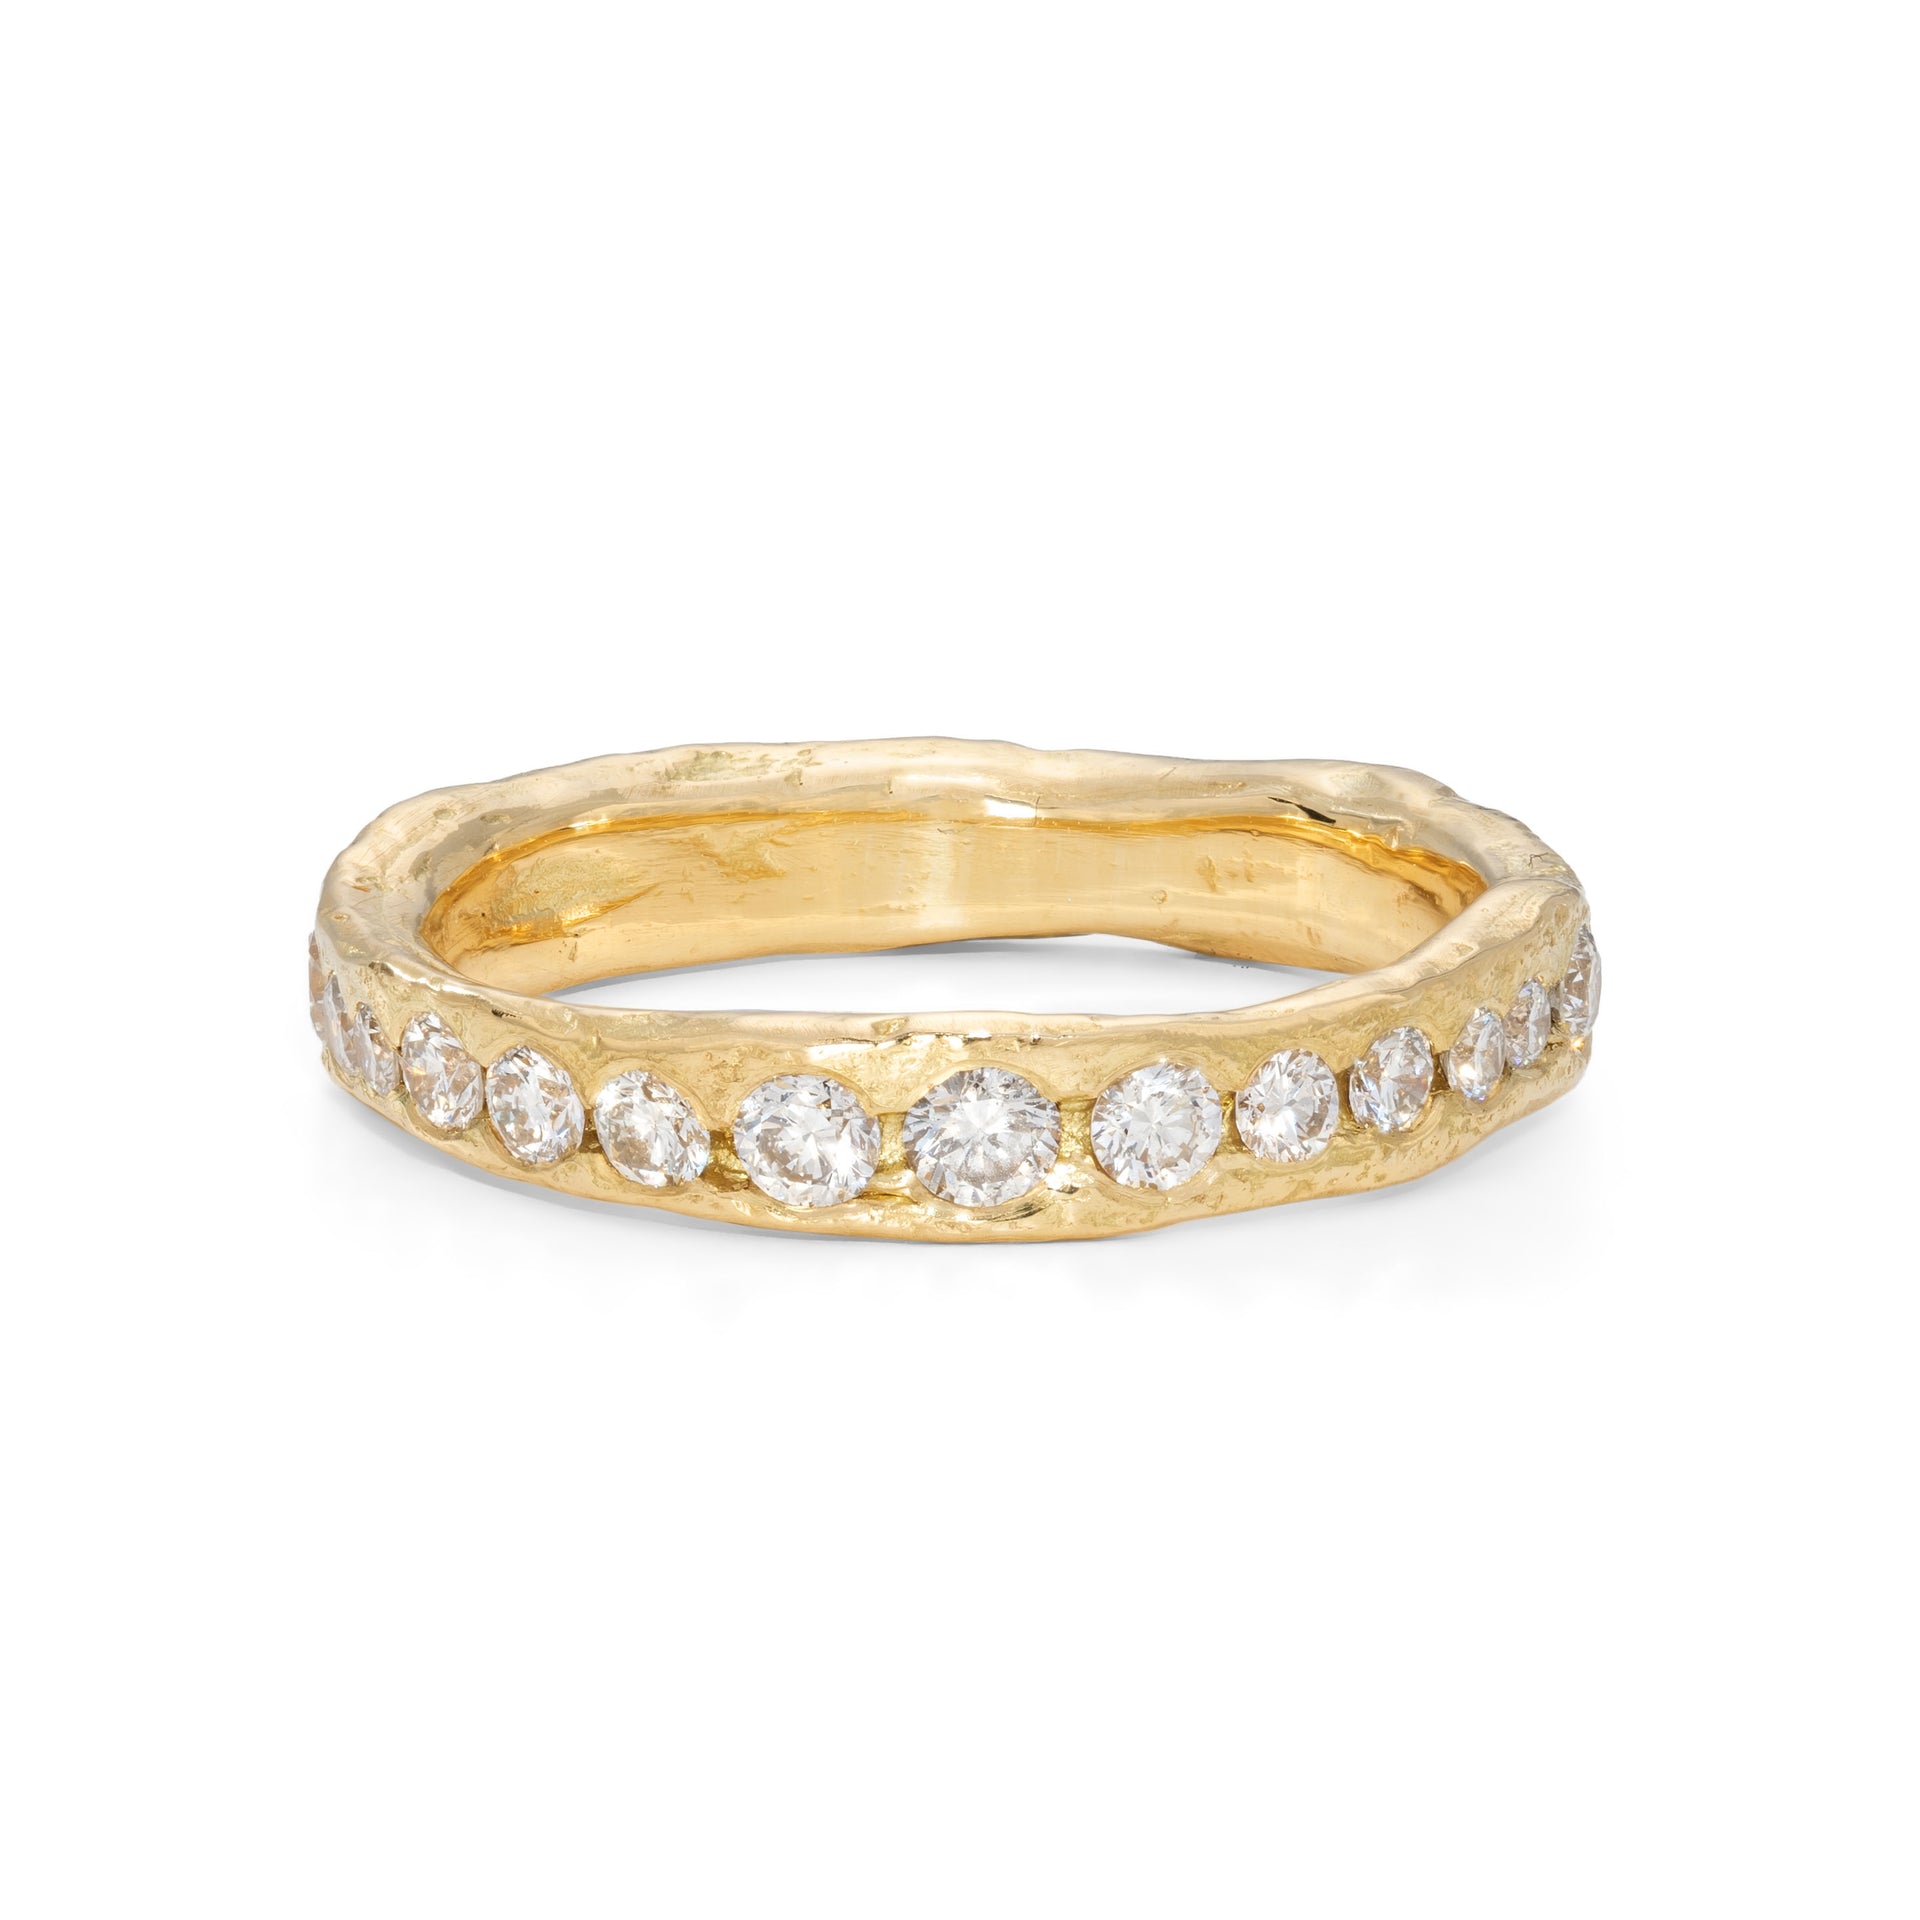 Unique, handcrafted, diamond and 18ct gold ring by Emily Nixon. This ring is set with diamonds all the way around the band.